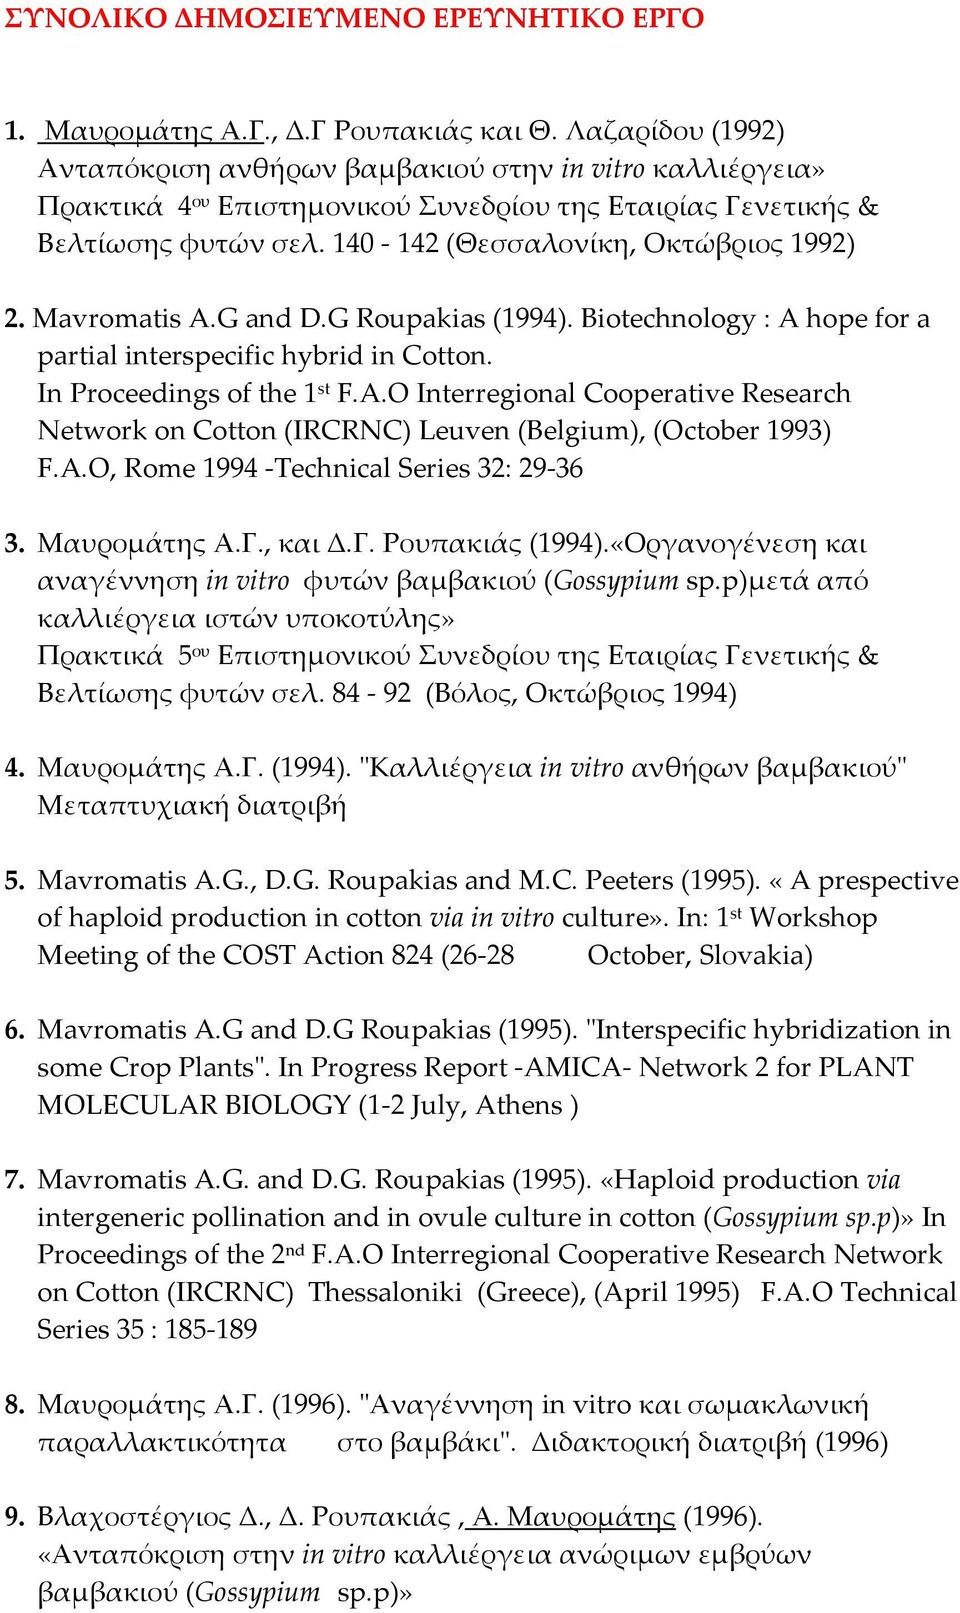 Mavromatis A.G and D.G Roupakias (1994). Biotechnology : A hope for a partial interspecific hybrid in Cotton. In Proceedings of the 1 st F.A.O Interregional Cooperative Research Network on Cotton (IRCRNC) Leuven (Belgium), (October 1993) F.